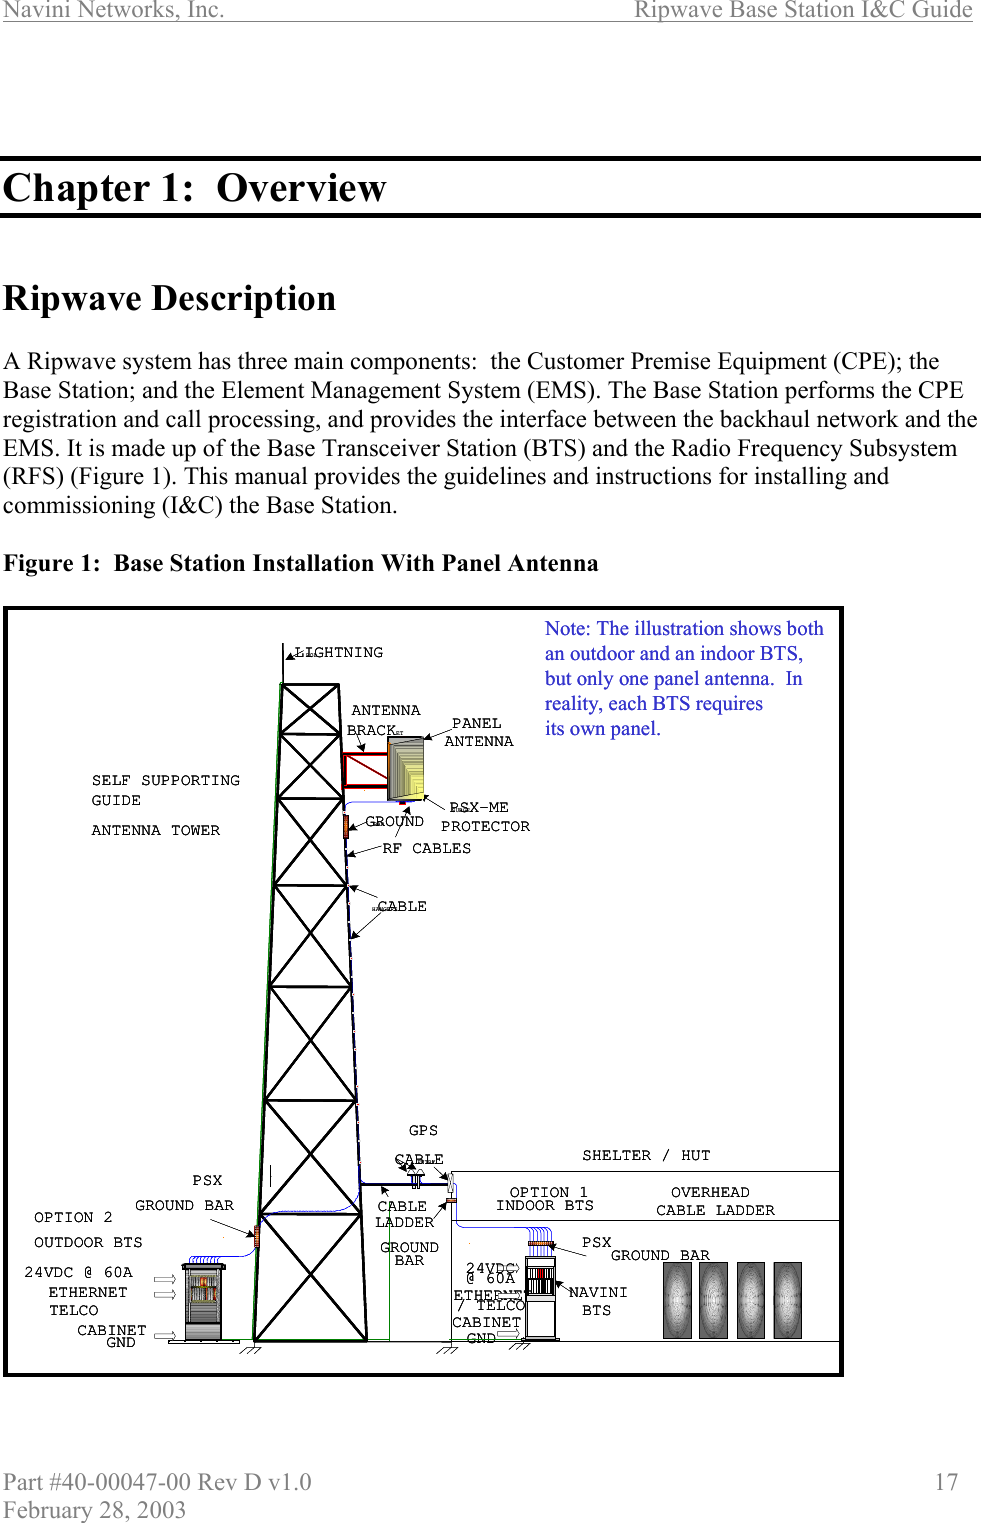 Navini Networks, Inc.                          Ripwave Base Station I&amp;C Guide Part #40-00047-00 Rev D v1.0                     17 February 28, 2003    Chapter 1:  Overview   Ripwave Description  A Ripwave system has three main components:  the Customer Premise Equipment (CPE); the Base Station; and the Element Management System (EMS). The Base Station performs the CPE registration and call processing, and provides the interface between the backhaul network and the EMS. It is made up of the Base Transceiver Station (BTS) and the Radio Frequency Subsystem (RFS) (Figure 1). This manual provides the guidelines and instructions for installing and commissioning (I&amp;C) the Base Station.  Figure 1:  Base Station Installation With Panel Antenna                              LIGHTNINGRODGPSETHERNET/ TELCOOVERHEADCABLE LADDERSHELTER / HUTSELF SUPPORTINGGUIDEANTENNA TOWERPANELANTENNAANTENNABRACKETPSX-MESURGEPROTECTORGROUNDBARRF CABLESCABLEHANGERSCABLELADDERCABLEENTRYGROUNDBAROPTION 1INDOOR BTSPSXGROUND BAR24VDC@ 60ACABINETGNDPSXGROUND BARNAVINIBTSETHERNETTELCO24VDC @ 60ACABINETGNDOPTION 2OUTDOOR BTSNote: The illustration shows bothan outdoor and an indoor BTS, but only one panel antenna.  In reality, each BTS requiresits own panel.LIGHTNINGRODGPSETHERNET/ TELCOOVERHEADCABLE LADDERSHELTER / HUTSELF SUPPORTINGGUIDEANTENNA TOWERPANELANTENNAANTENNABRACKETPSX-MESURGEPROTECTORGROUNDBARRF CABLESCABLEHANGERSCABLELADDERCABLEENTRYGROUNDBAROPTION 1INDOOR BTSPSXGROUND BAR24VDC@ 60ACABINETGNDPSXGROUND BARNAVINIBTSETHERNETTELCO24VDC @ 60ACABINETGNDOPTION 2OUTDOOR BTSLIGHTNINGRODGPSETHERNET/ TELCOOVERHEADCABLE LADDERSHELTER / HUTSELF SUPPORTINGGUIDEANTENNA TOWERPANELANTENNAANTENNABRACKETPSX-MESURGEPROTECTORGROUNDBARRF CABLESCABLEHANGERSCABLELADDERCABLEENTRYGROUNDBAROPTION 1INDOOR BTSPSXGROUND BAR24VDC@ 60ACABINETGNDPSXGROUND BARNAVINIBTSETHERNETTELCO24VDC @ 60ACABINETGNDOPTION 2OUTDOOR BTSNote: The illustration shows bothan outdoor and an indoor BTS, but only one panel antenna.  In reality, each BTS requiresits own panel.